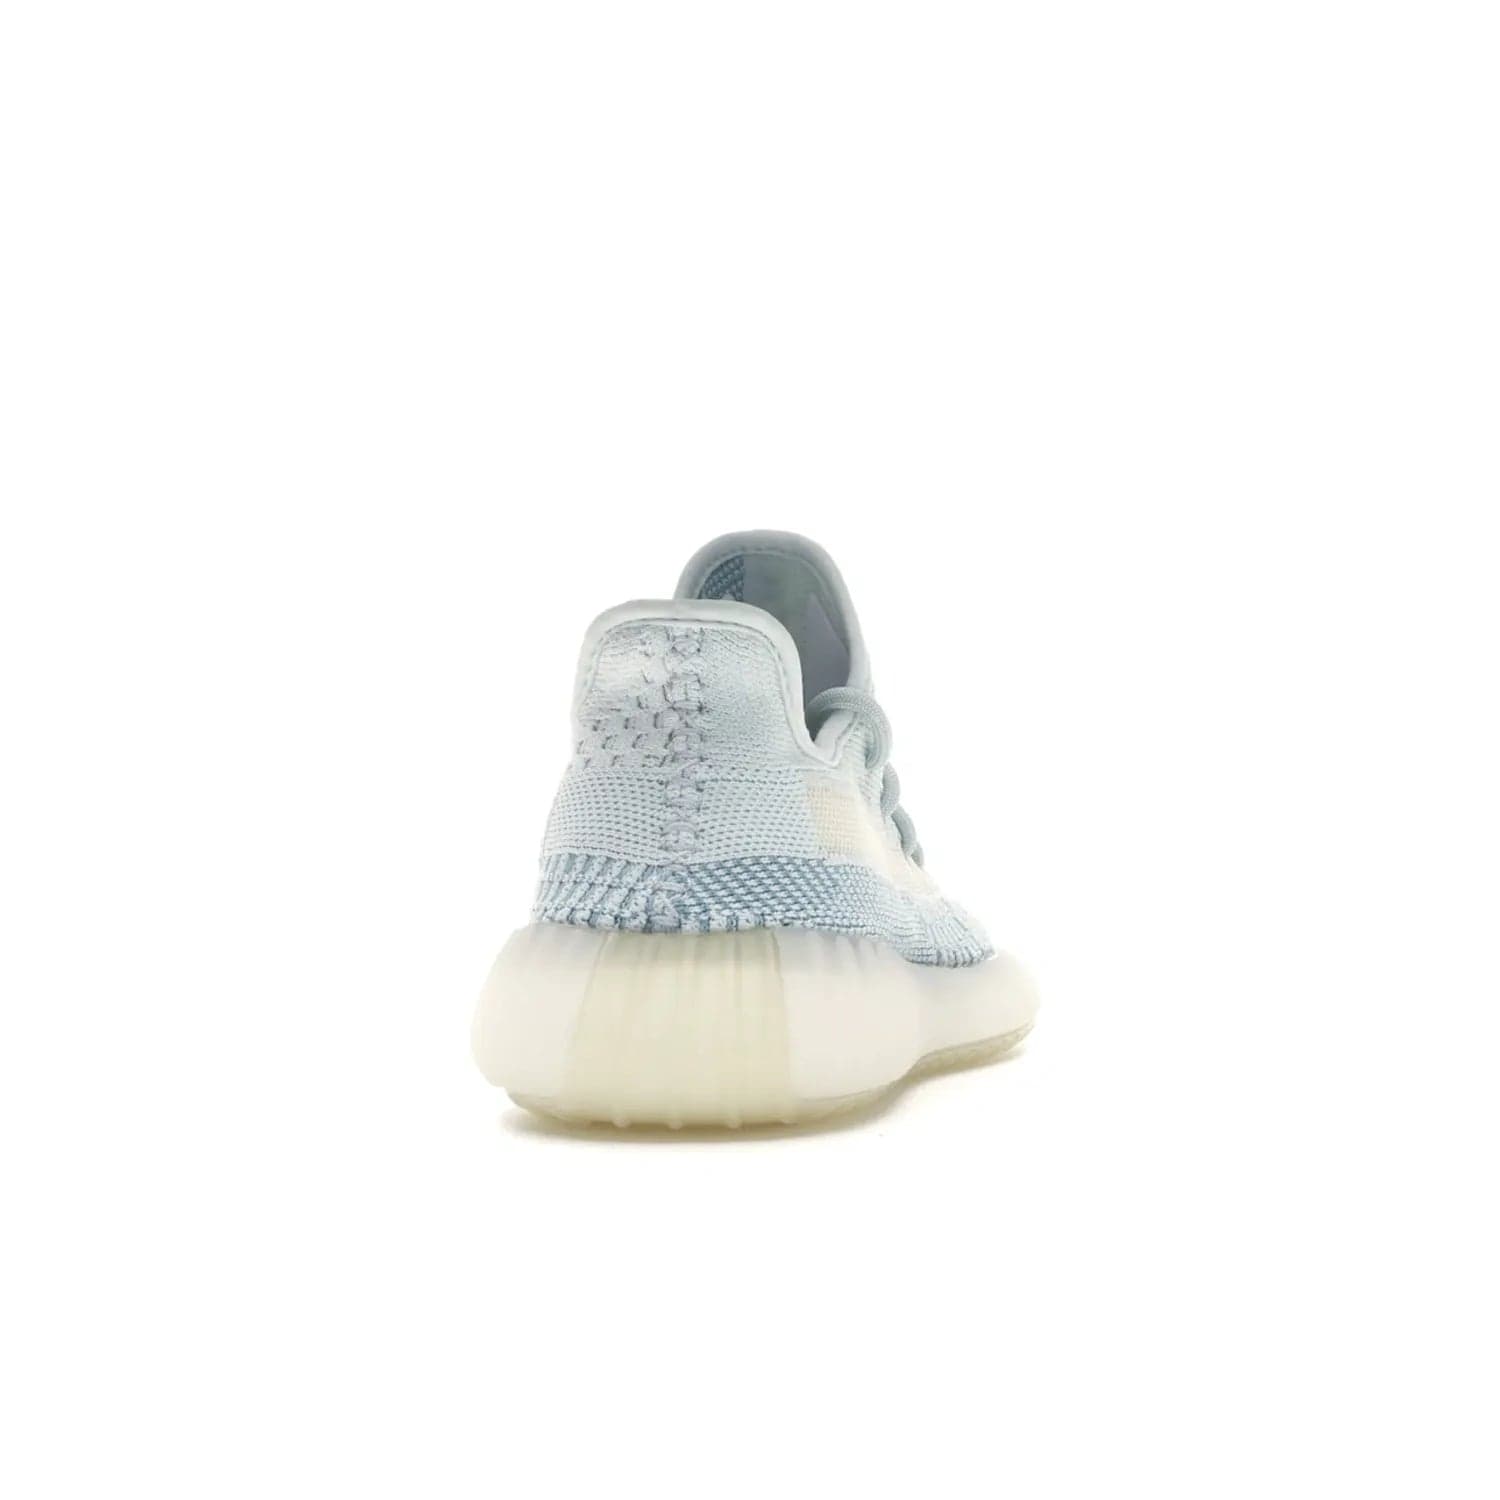 adidas Yeezy Boost 350 V2 Cloud White (Non-Reflective) - Image 29 - Only at www.BallersClubKickz.com - Adidas Yeezy Boost 350 V2 Cloud White (Non-Reflective) features Primeknit fabric and a unique, eye-catching design of cream, bluish-white, and transparent strip. Step out in timeless style with this eye-catching sneaker.